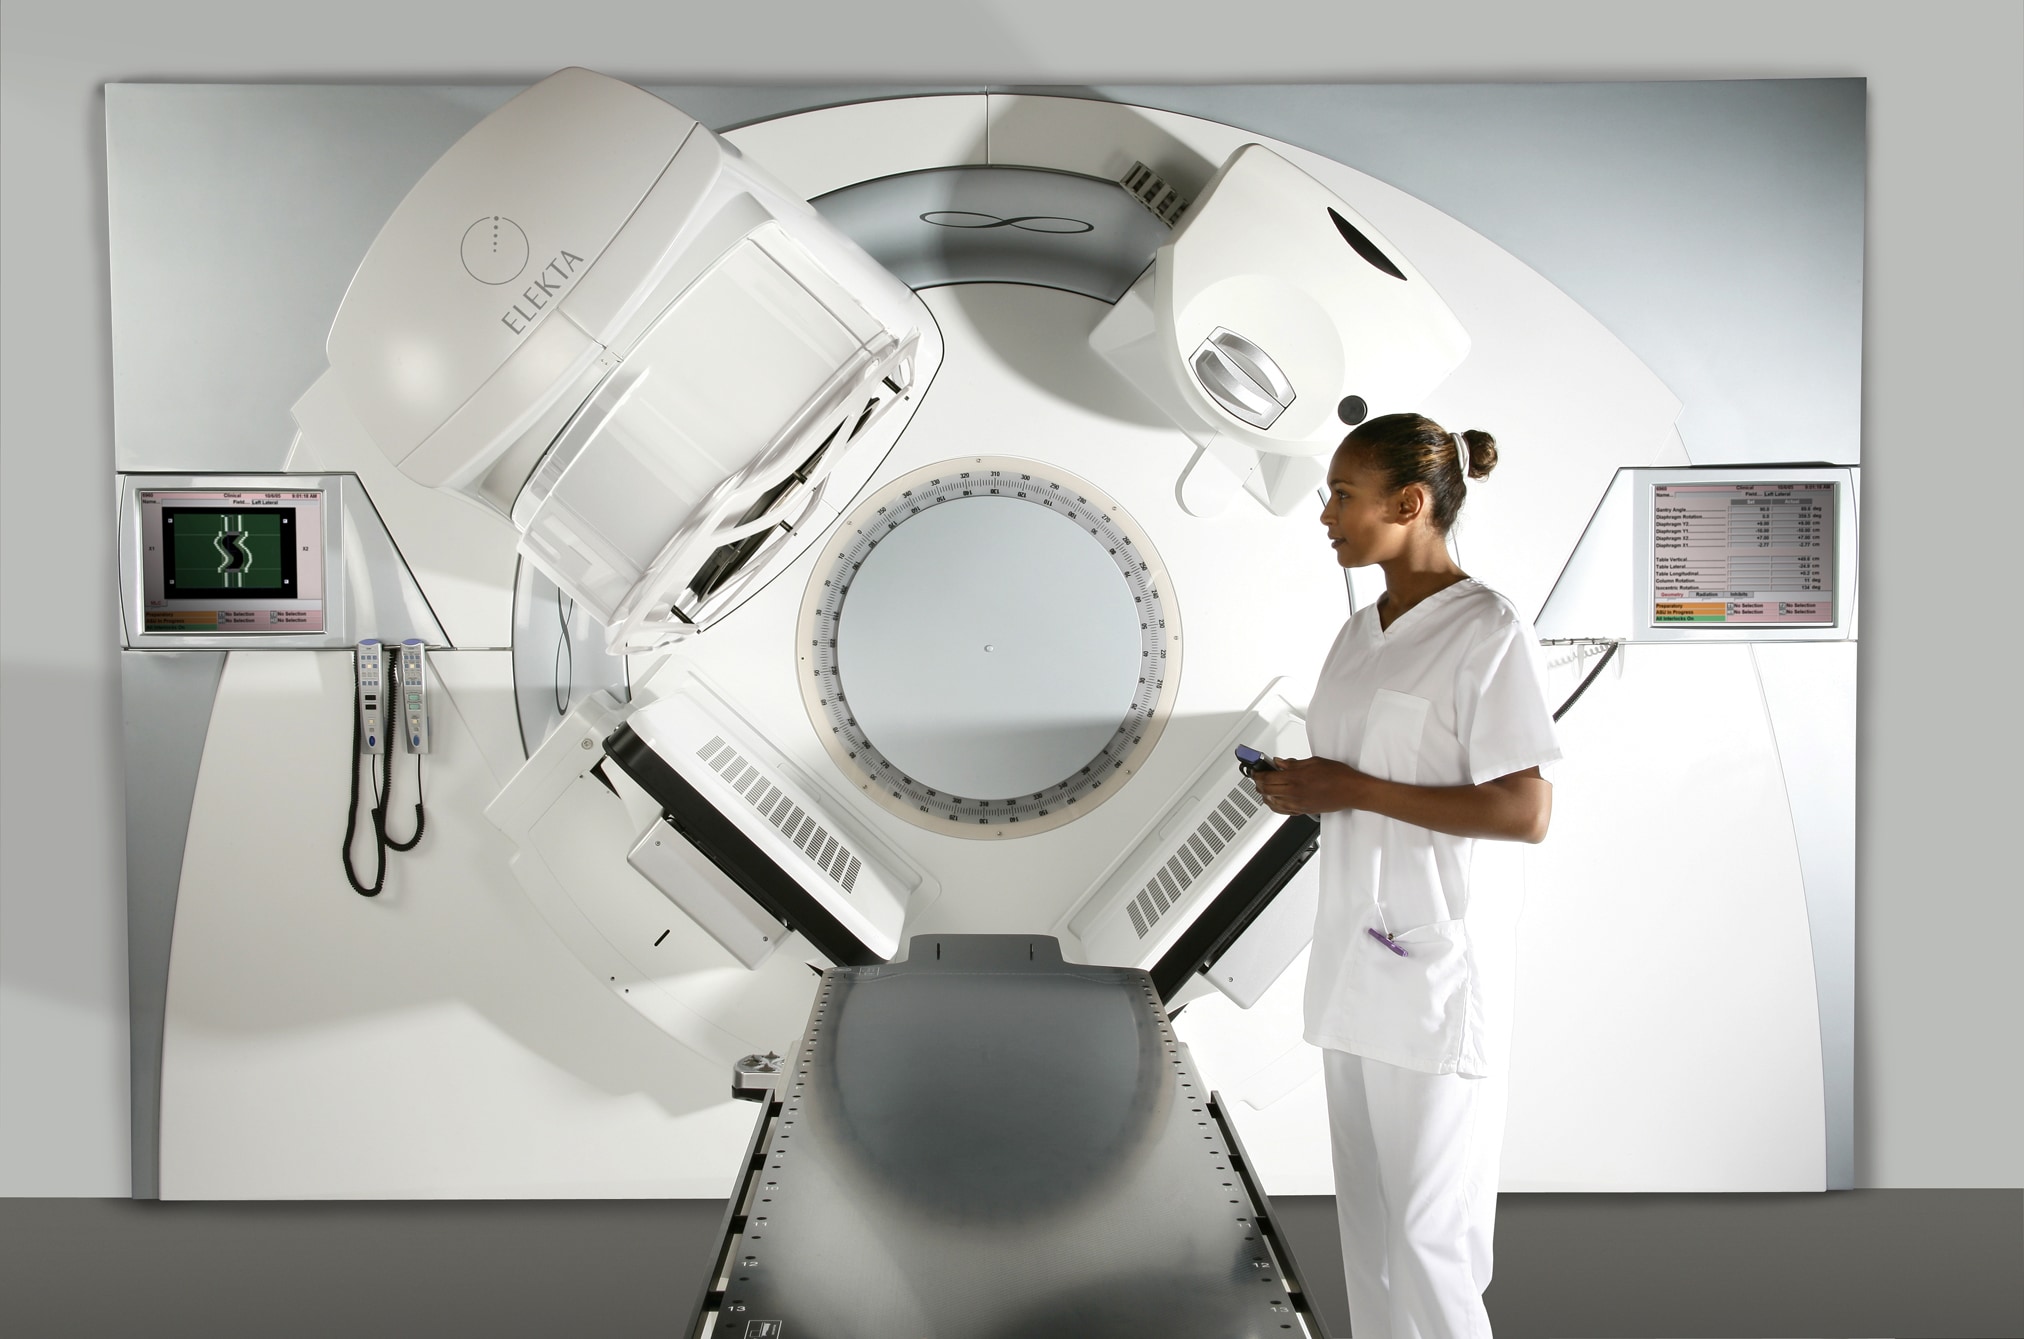 Elekta and Philips research consortium on MRIGuided radiation therapy